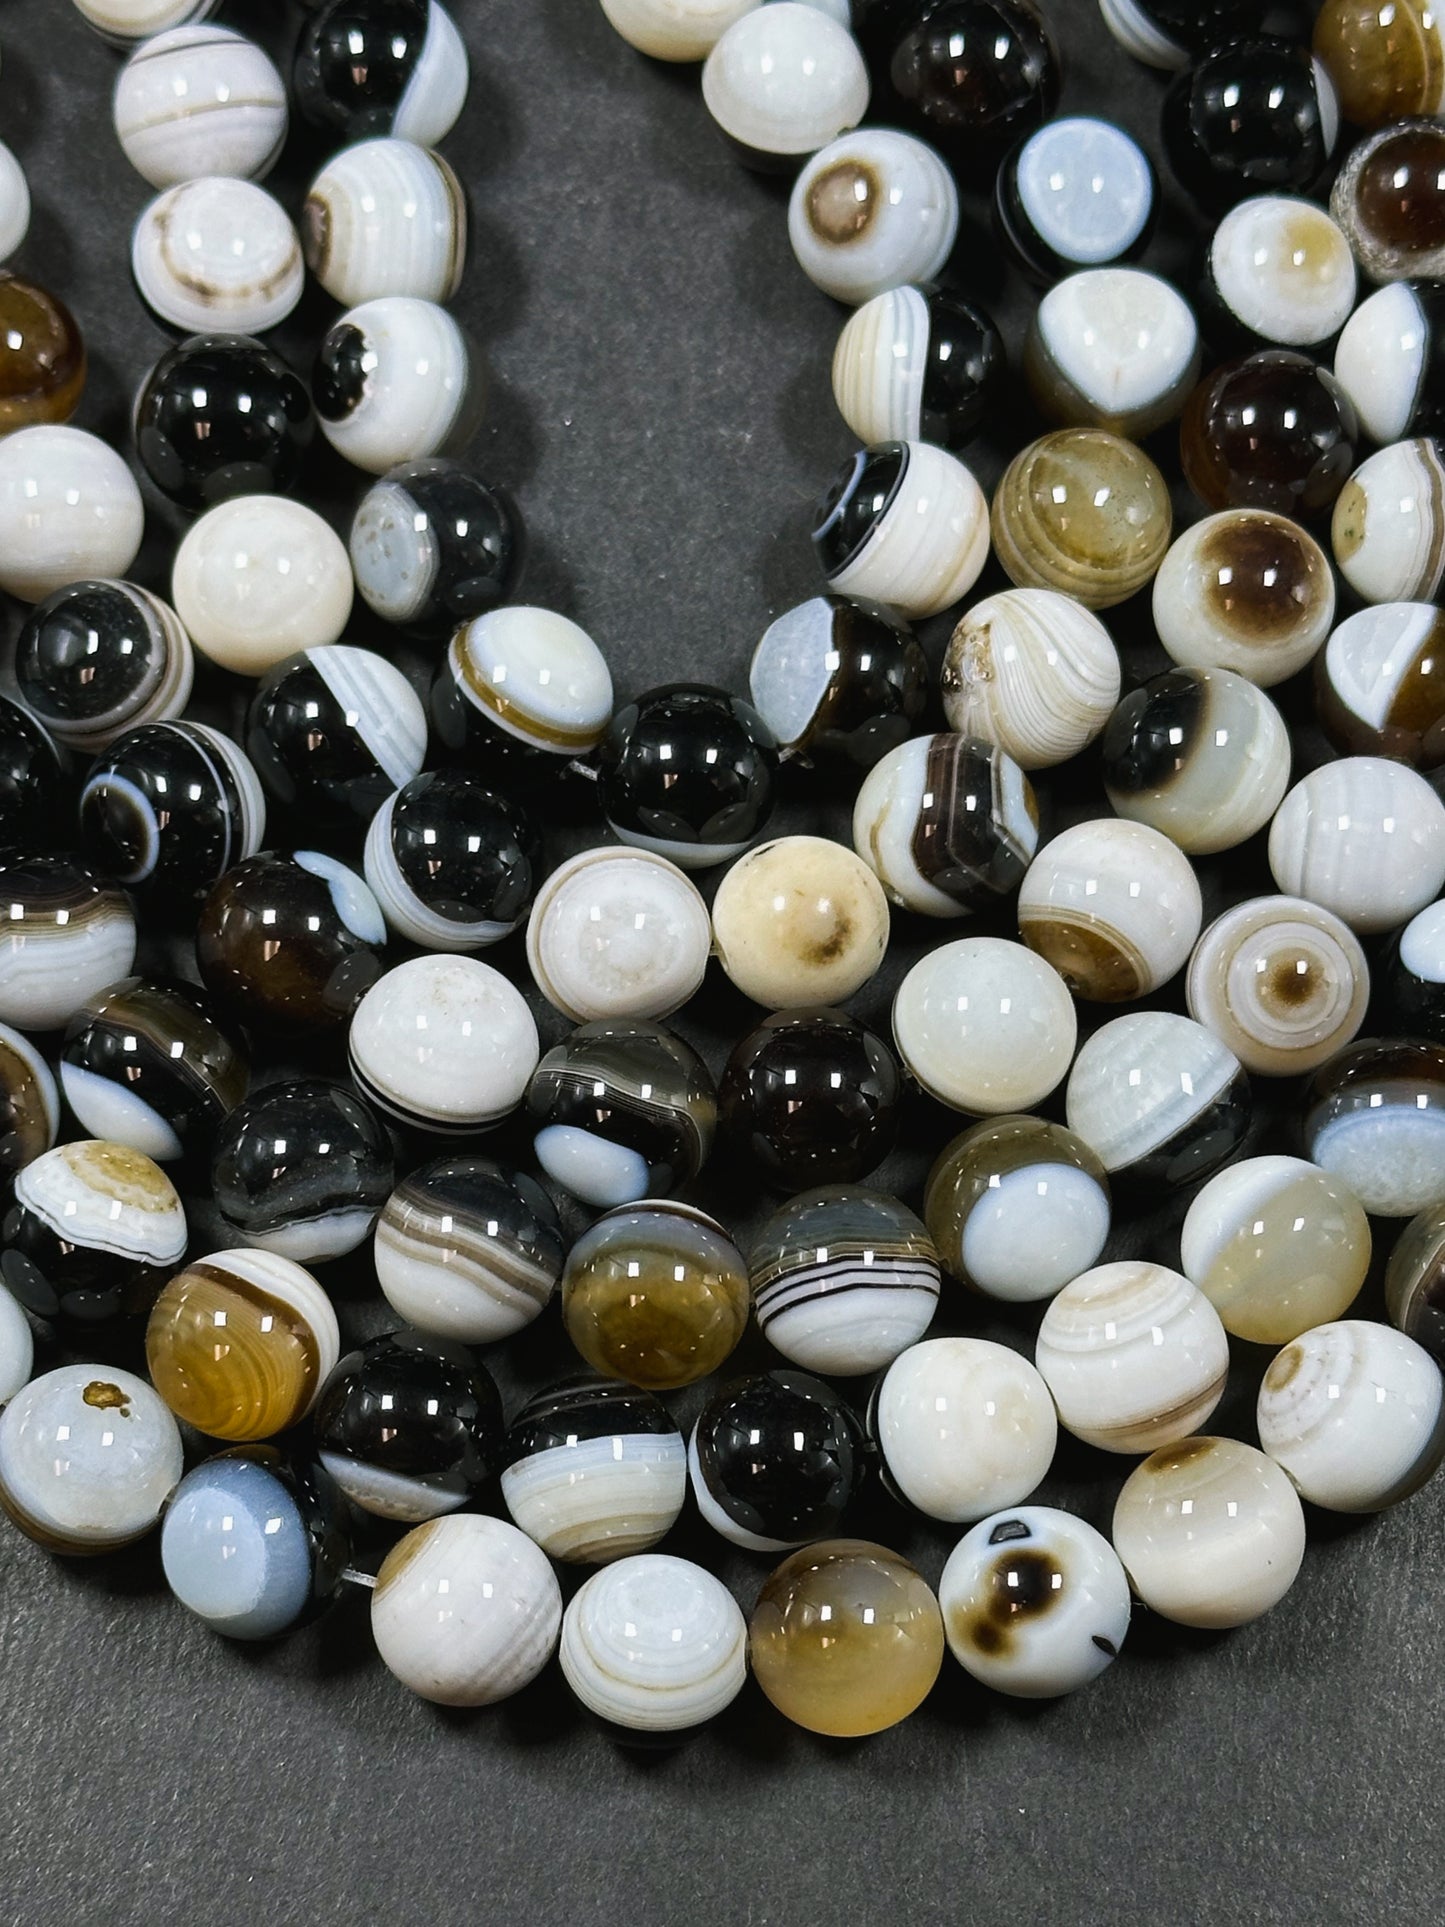 Natural Agate Gemstone Bead 12mm Round Beads, Beautiful Natural Multicolor White Brown Black Color Swirly Agate Gemstone Beads 15.5" Strand